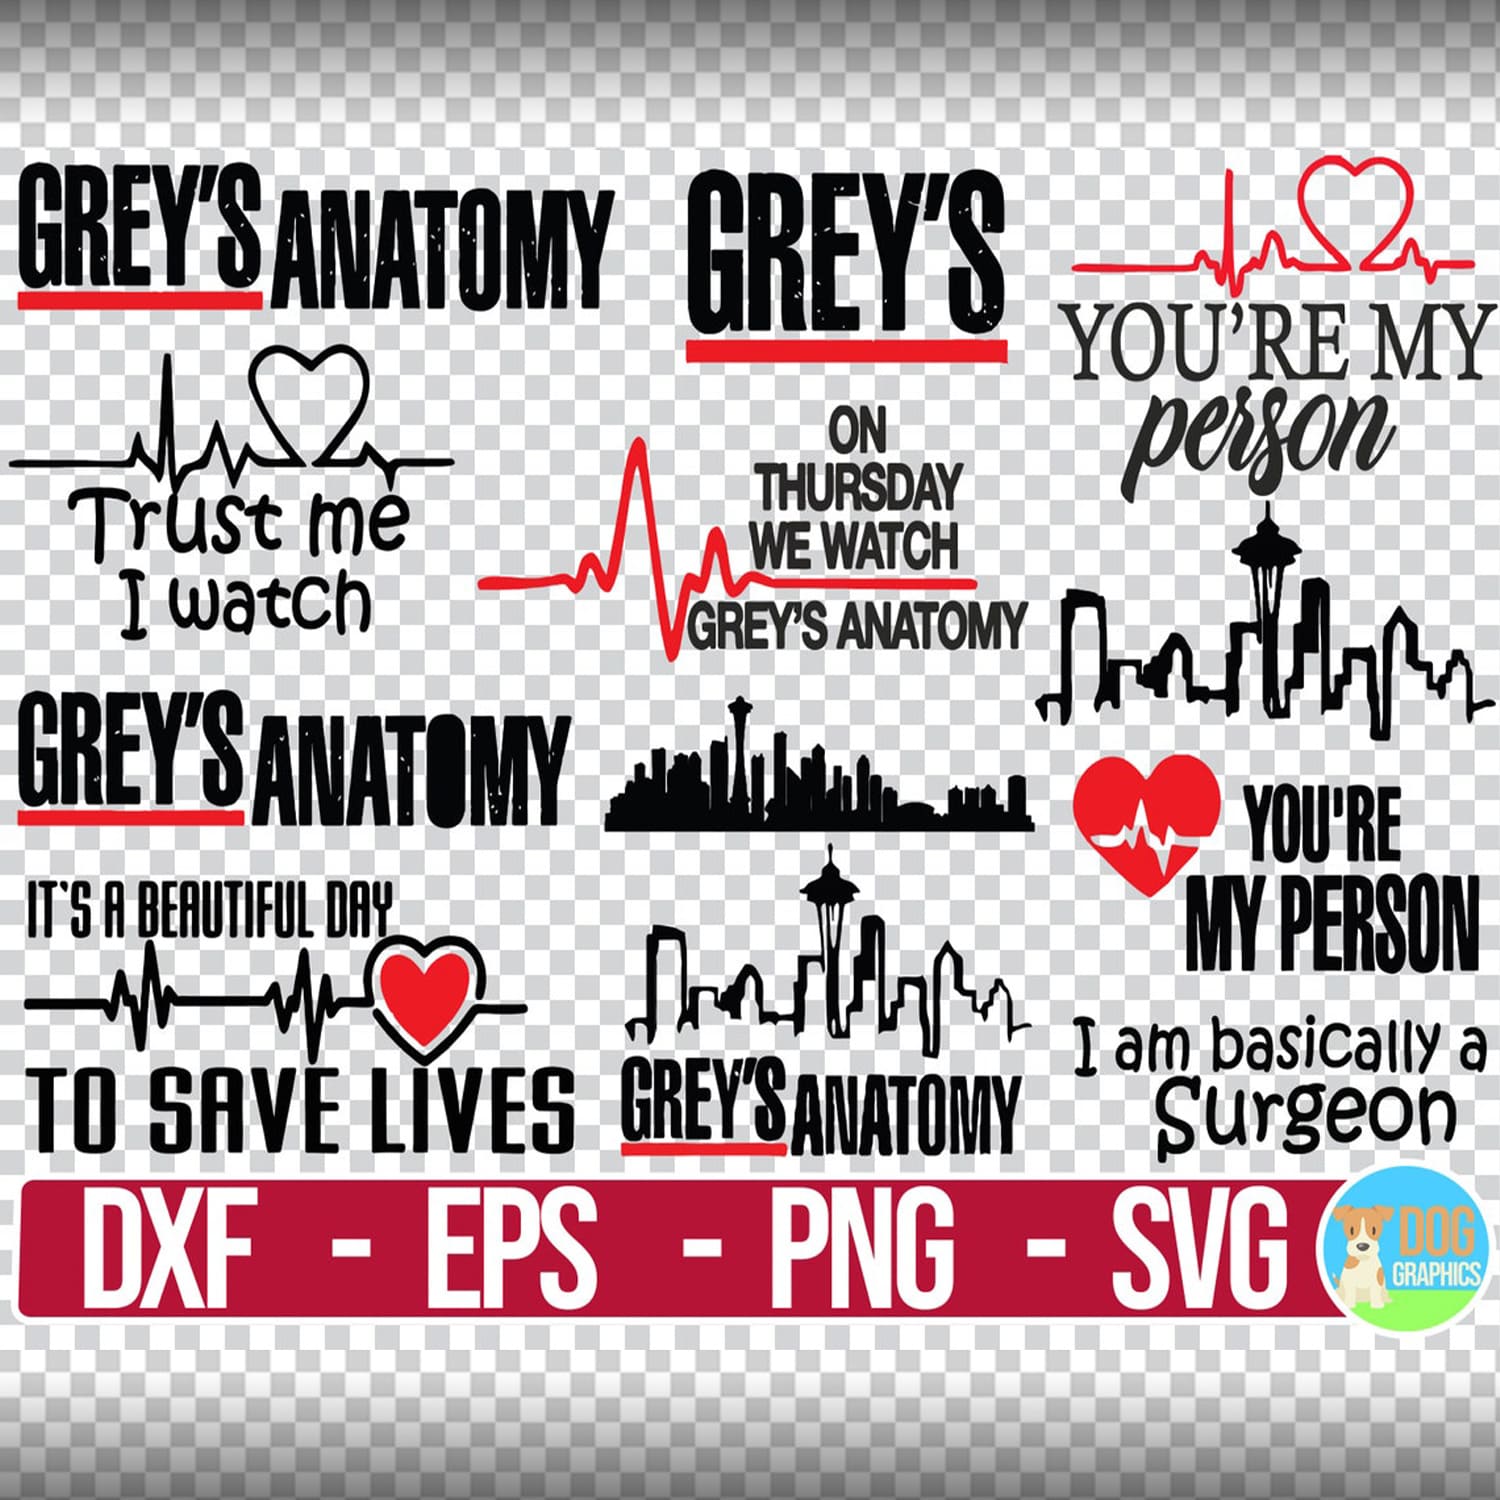 Greys Anatomy SVG cutting files cover.